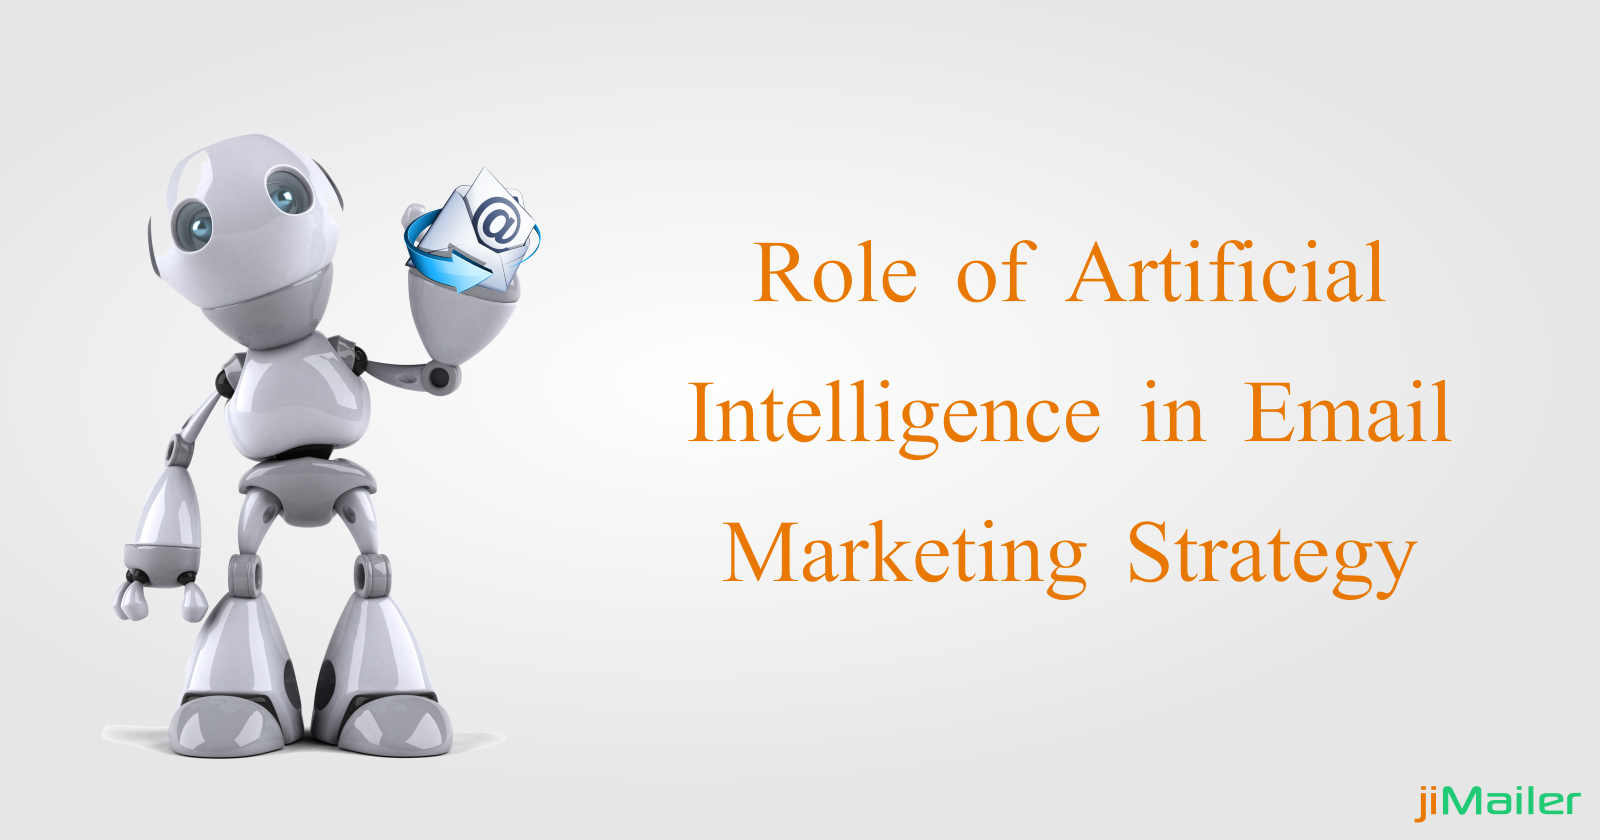 Role of Artificial Intelligence in Email Marketing Strategy